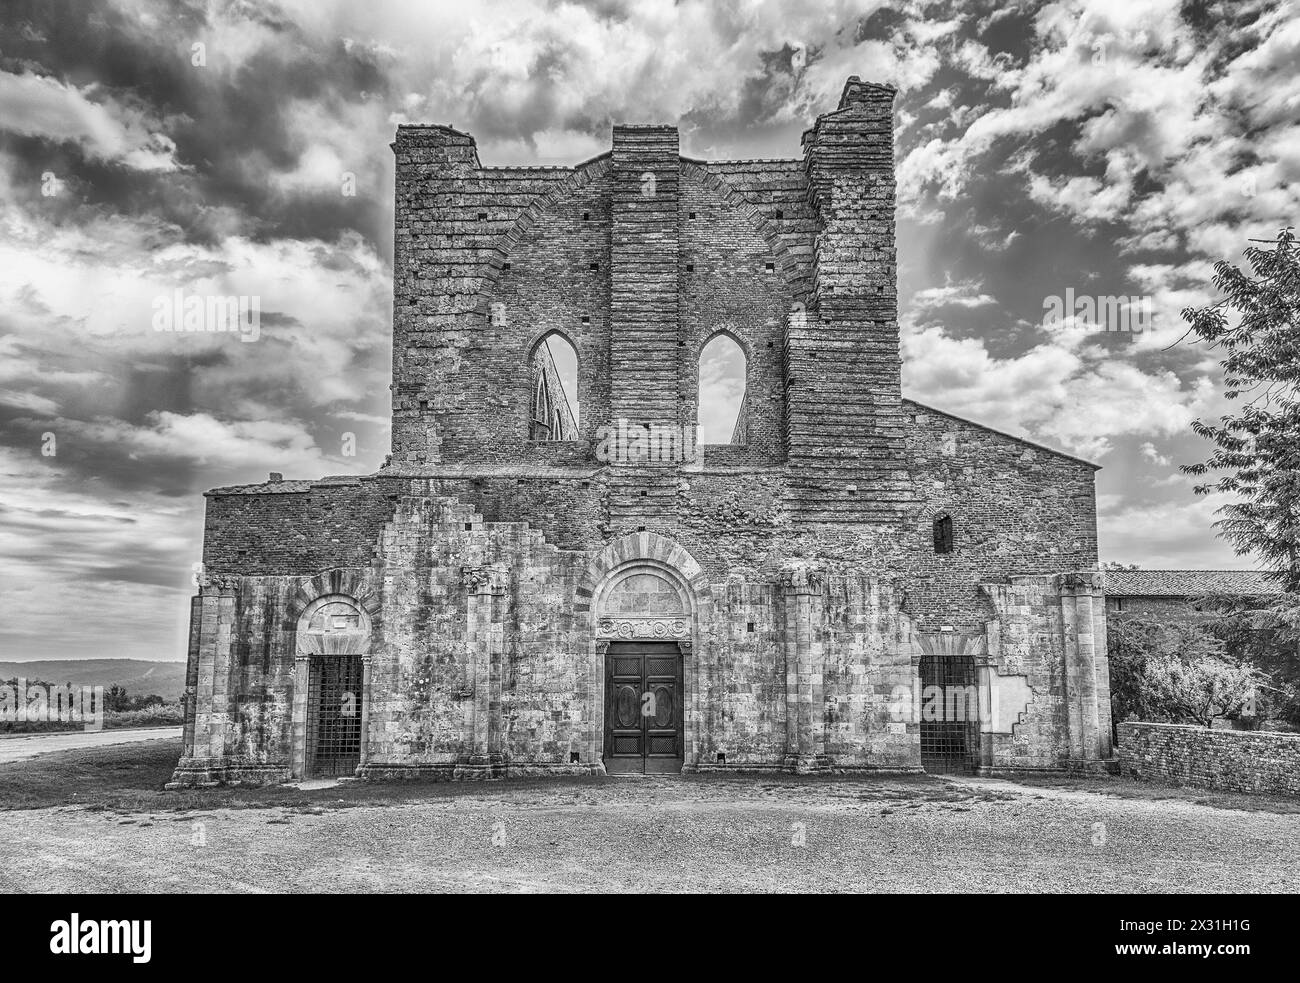 CHIUSDINO, ITALY - JUNE 22: Exterior view of the iconic Abbey of San Galgano, a Cistercian Monastery in the town of Chiusdino, in the province of Sien Stock Photo